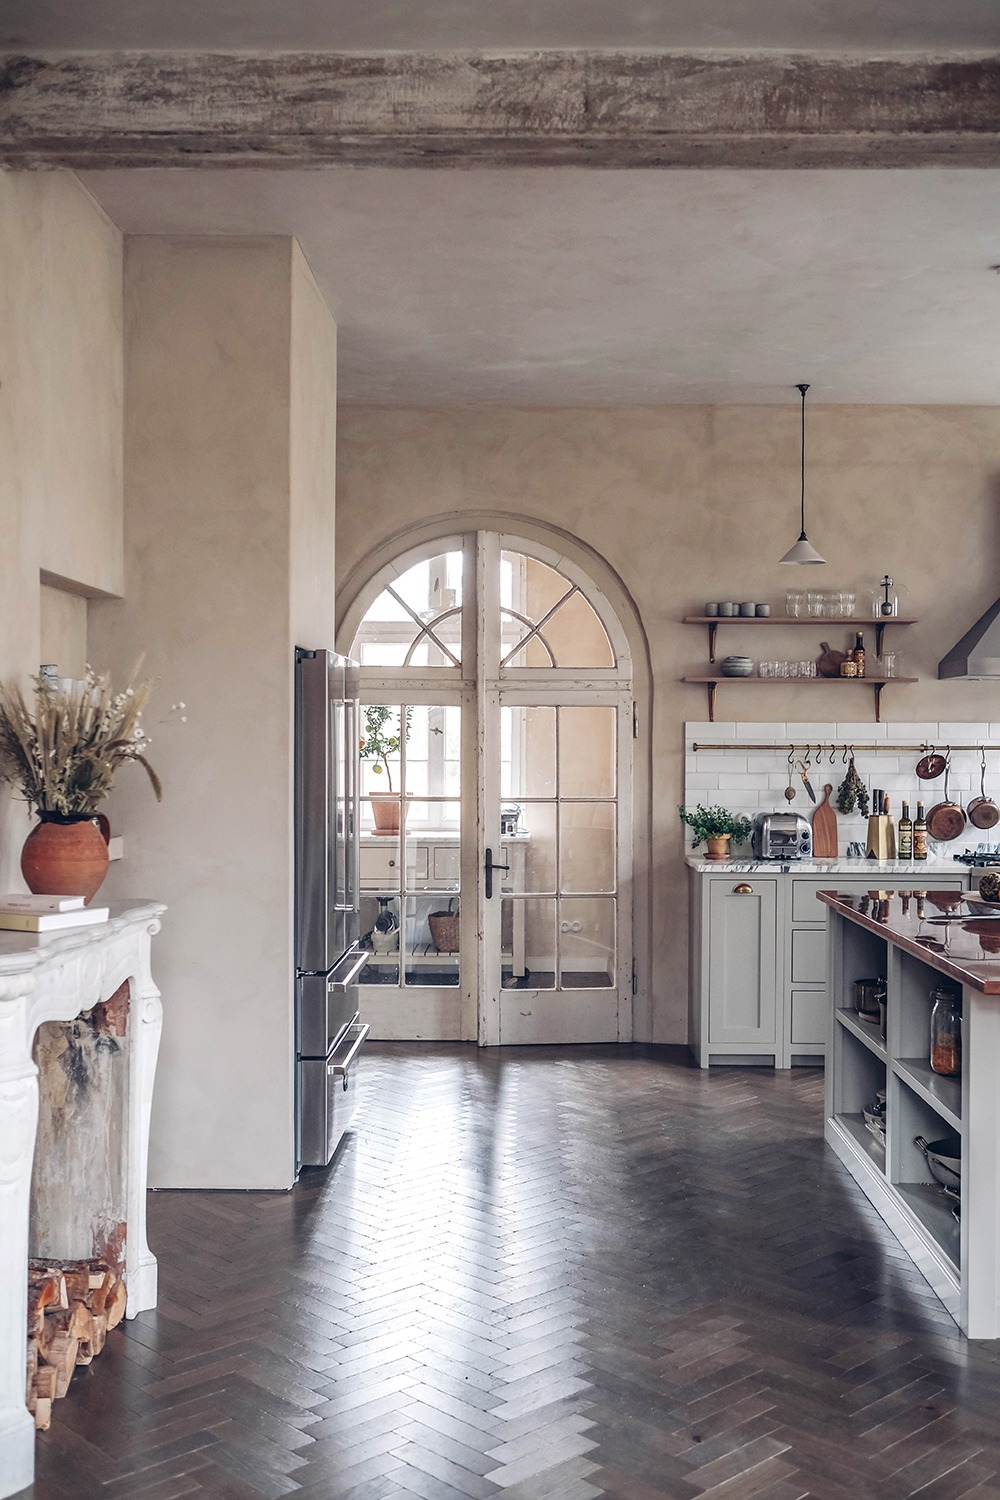 Décor Inspiration: An Elegant Kitchen in an Old Schoolhouse in the German Countryside with Marble Counters & Herringbone Floors